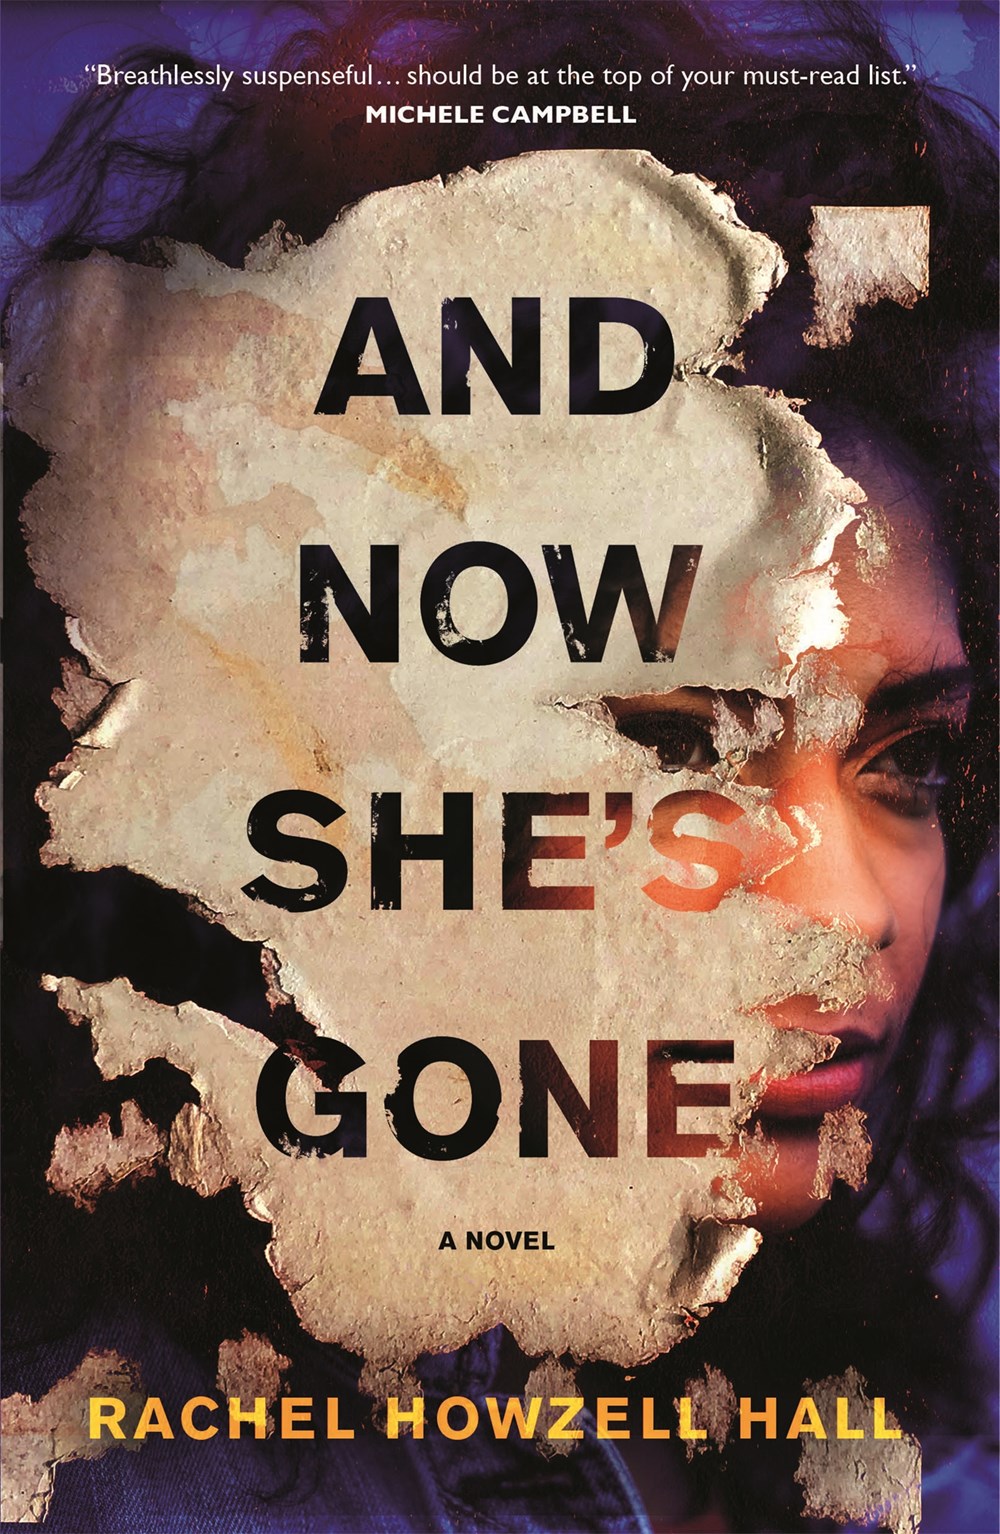 Review: And Now She’s Gone by Rachel Howzell Hall (audio)